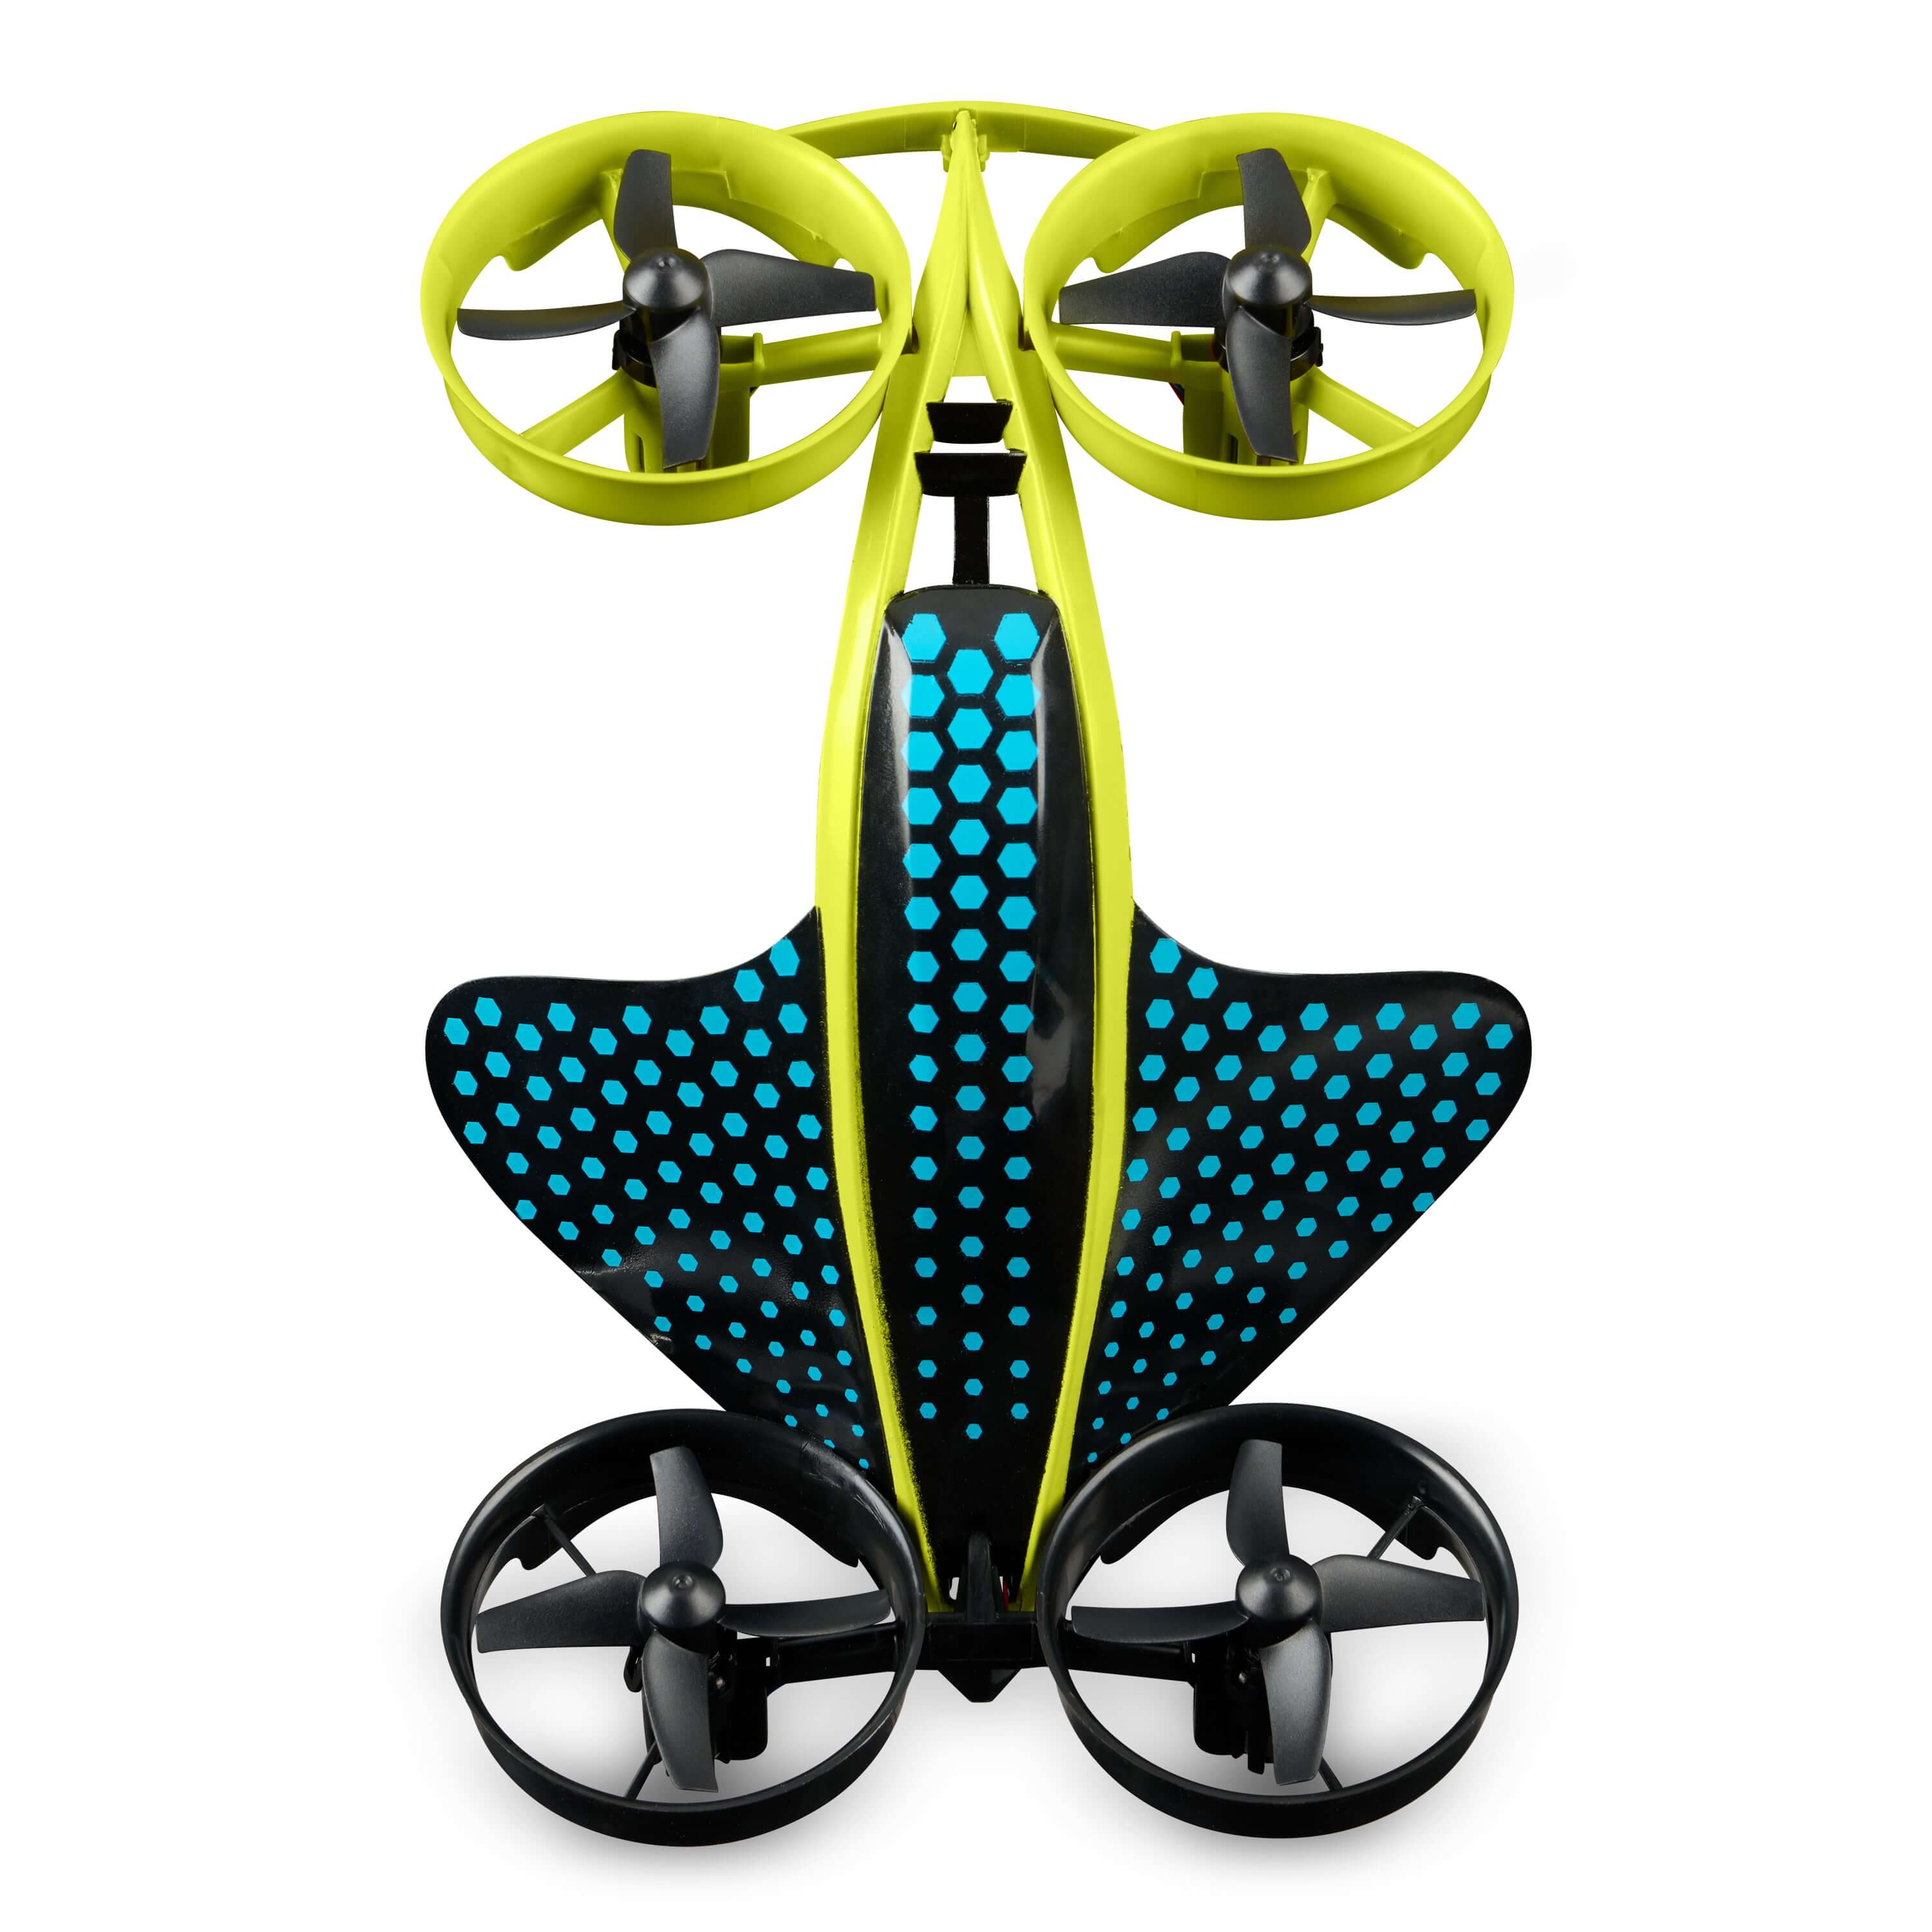 Hybrid Stunt Drone 3-in-1 Air To Water Quadcopter Remote Control Flying Toy/Diving Boat/Racing Car for Kids